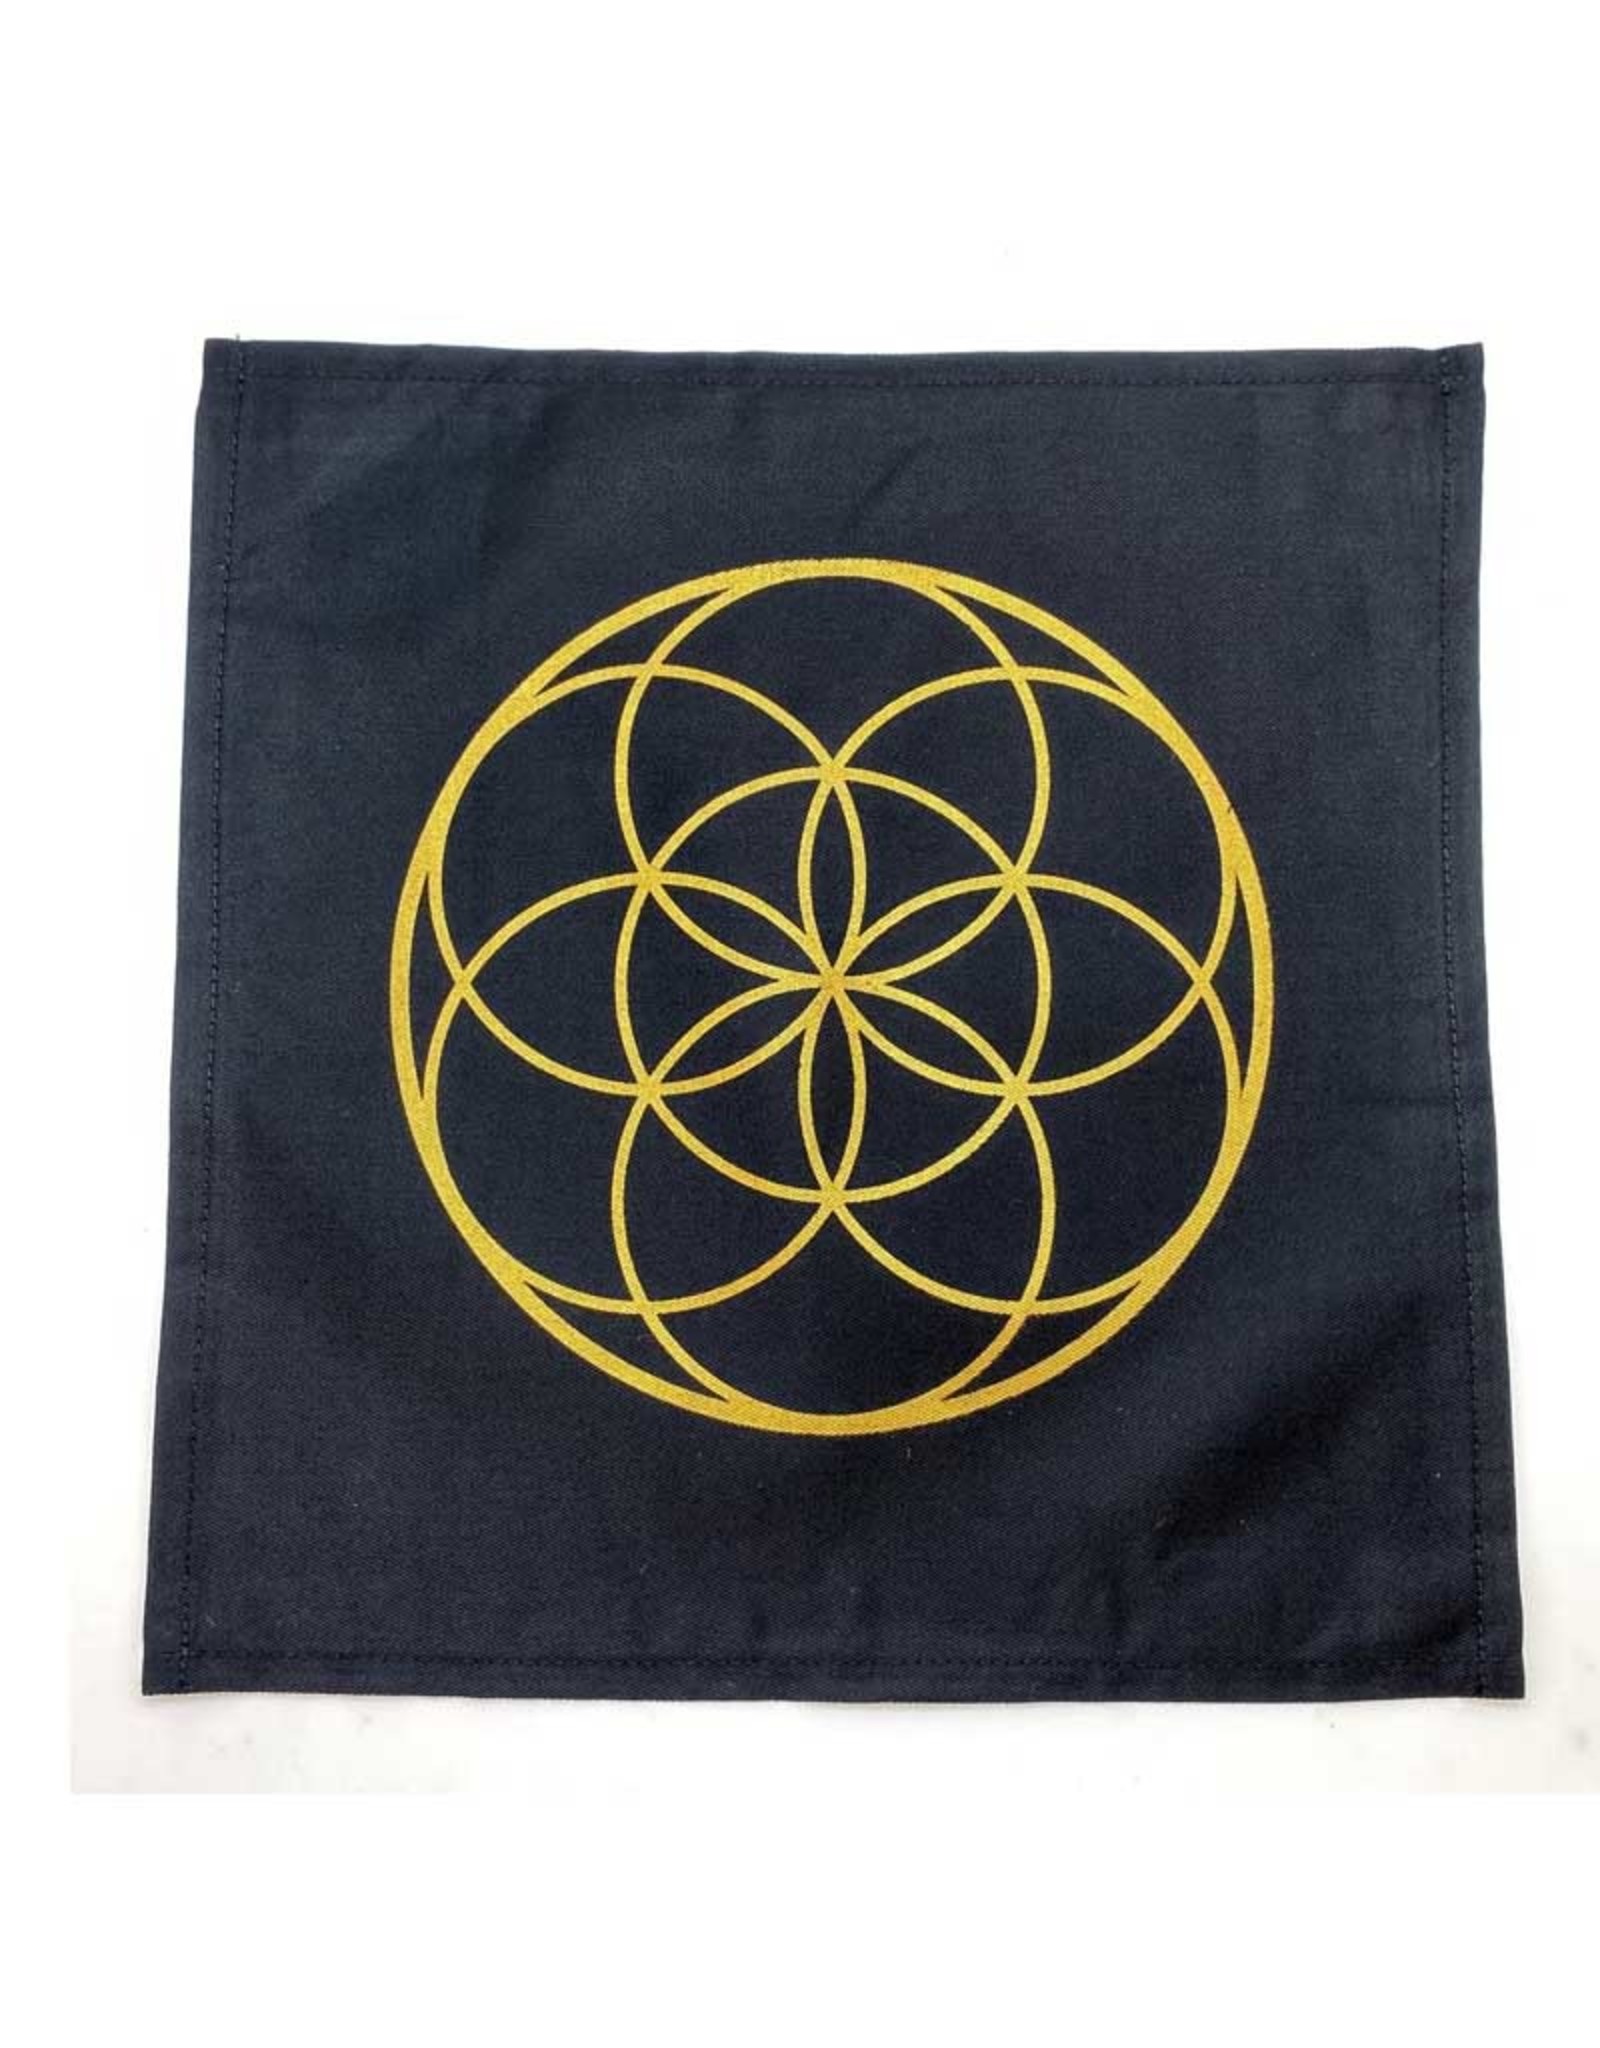 Seed of Life Crystal Grid Mat  - 12″ x 12″